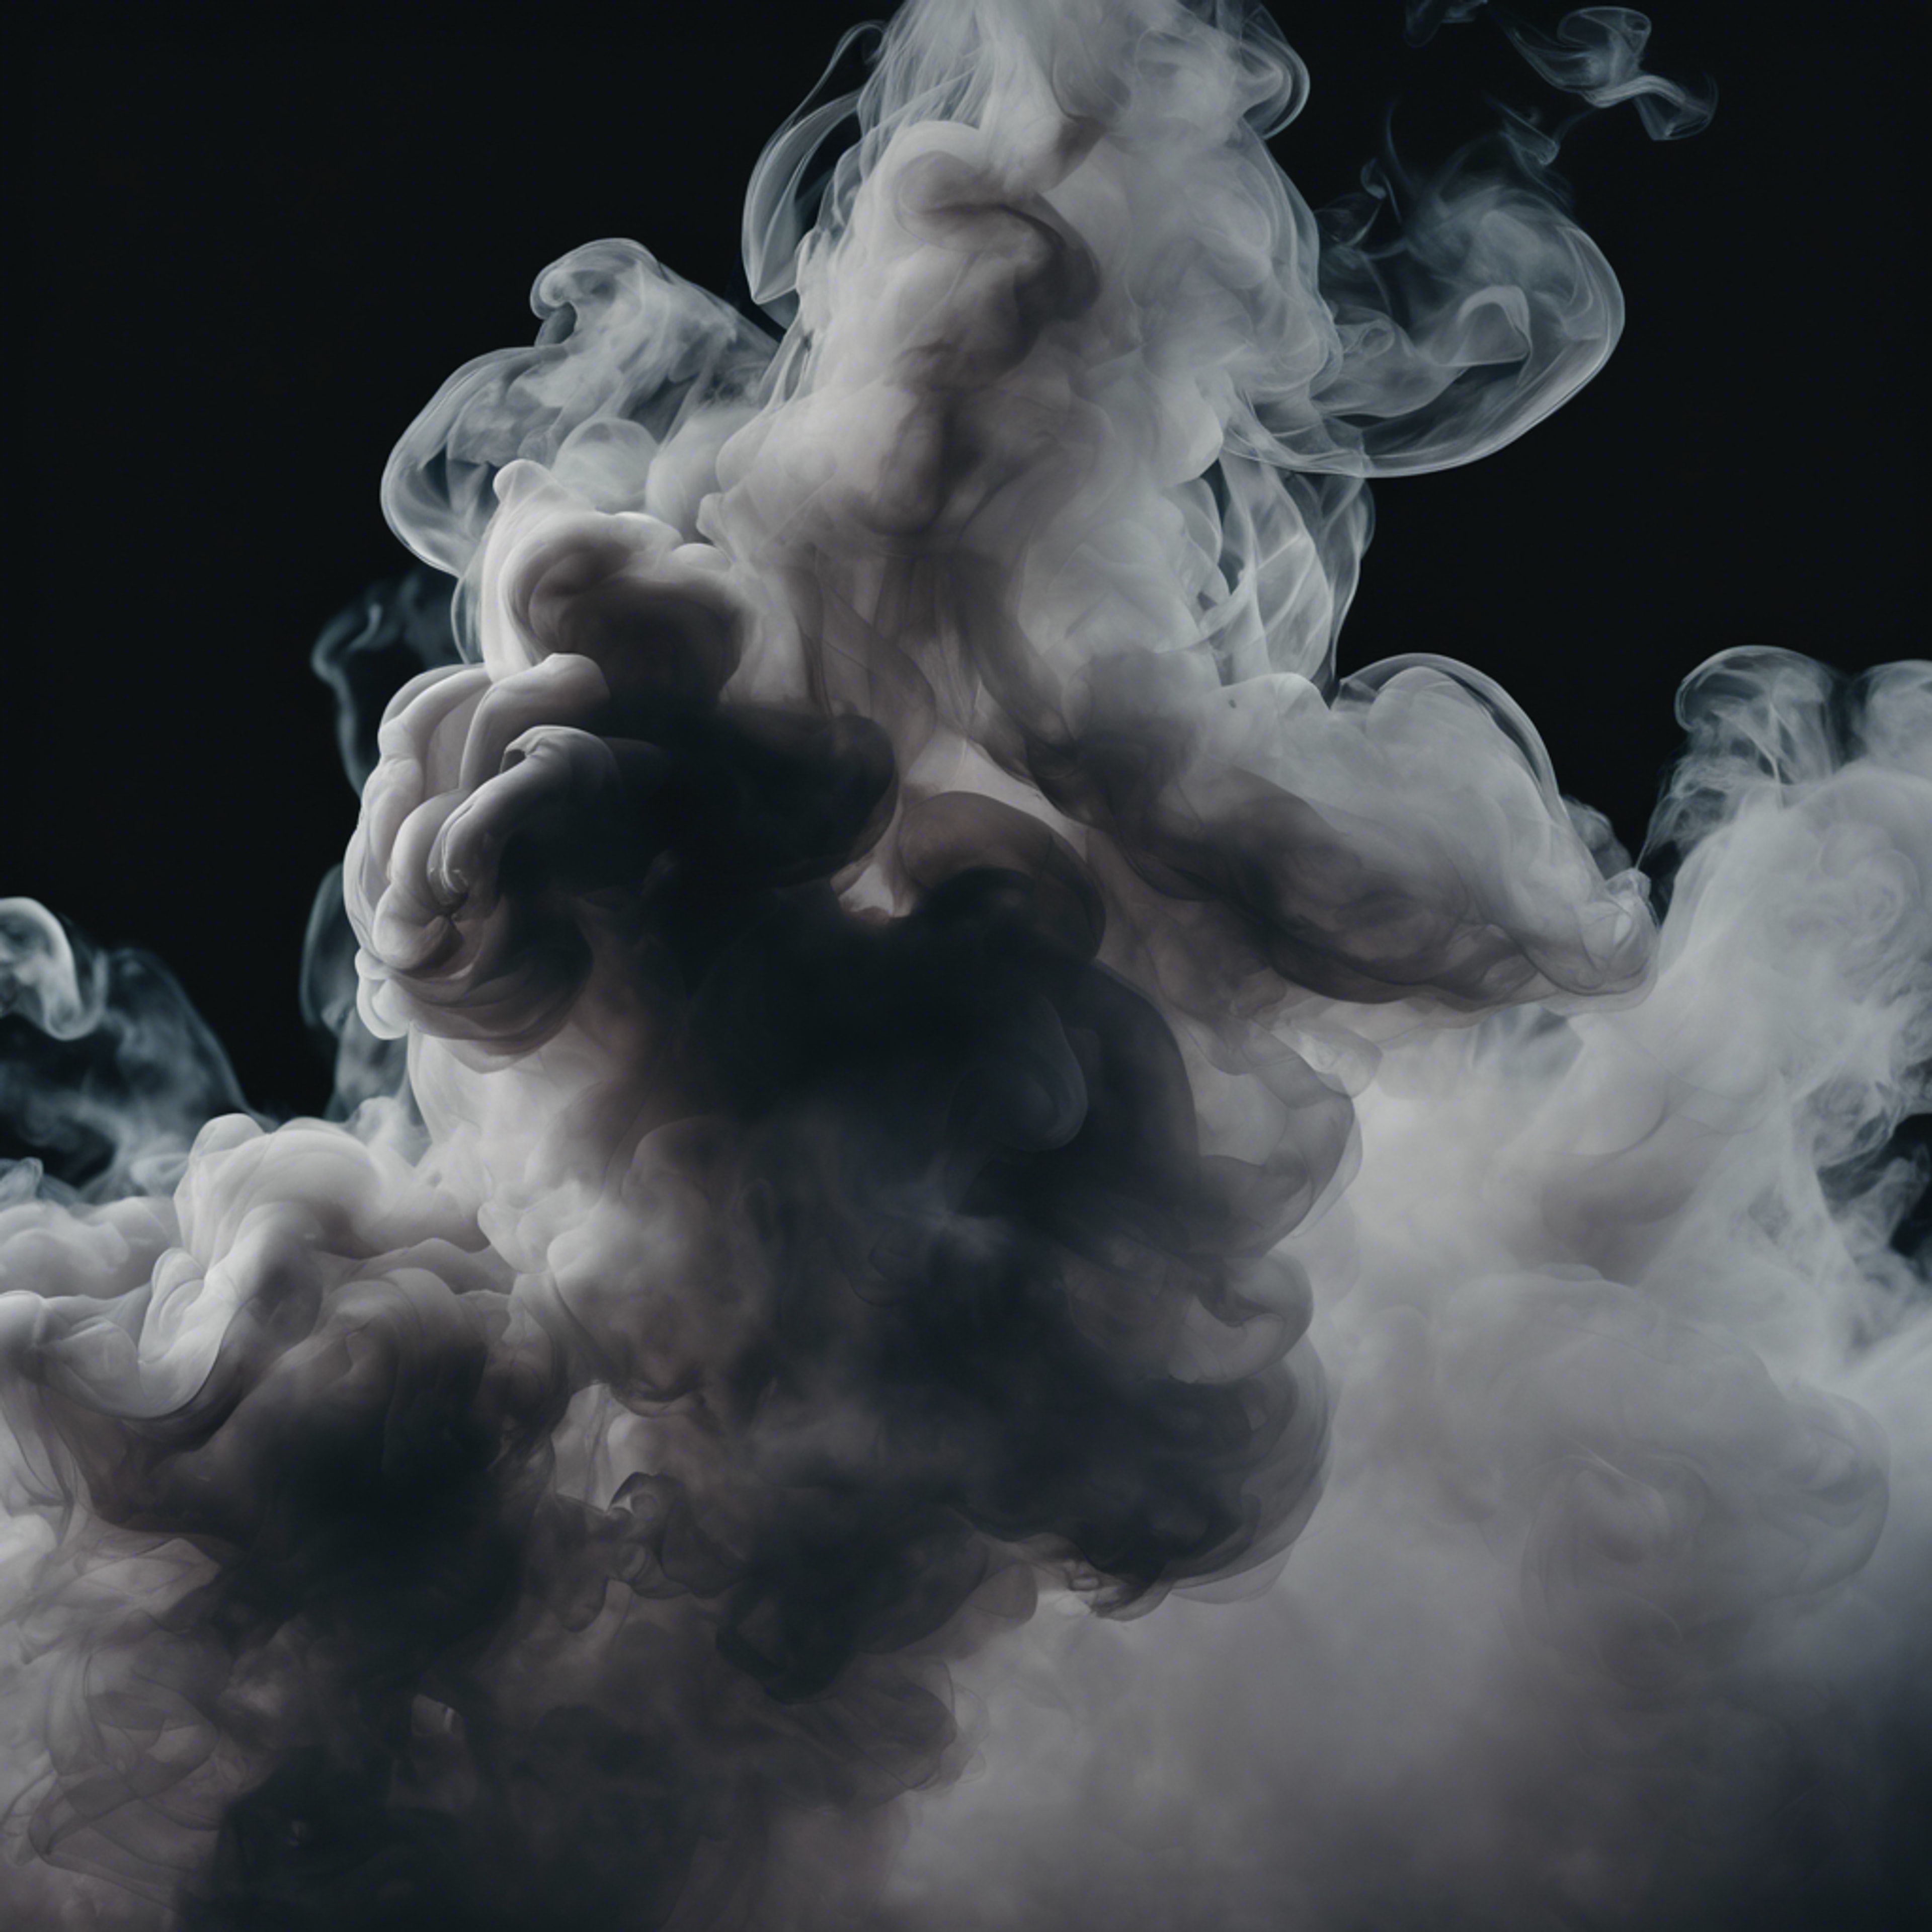 The ethereal beauty of grey smoke dancing against a midnight black backdrop. Tapeta[4e0cbc250ce44479929e]